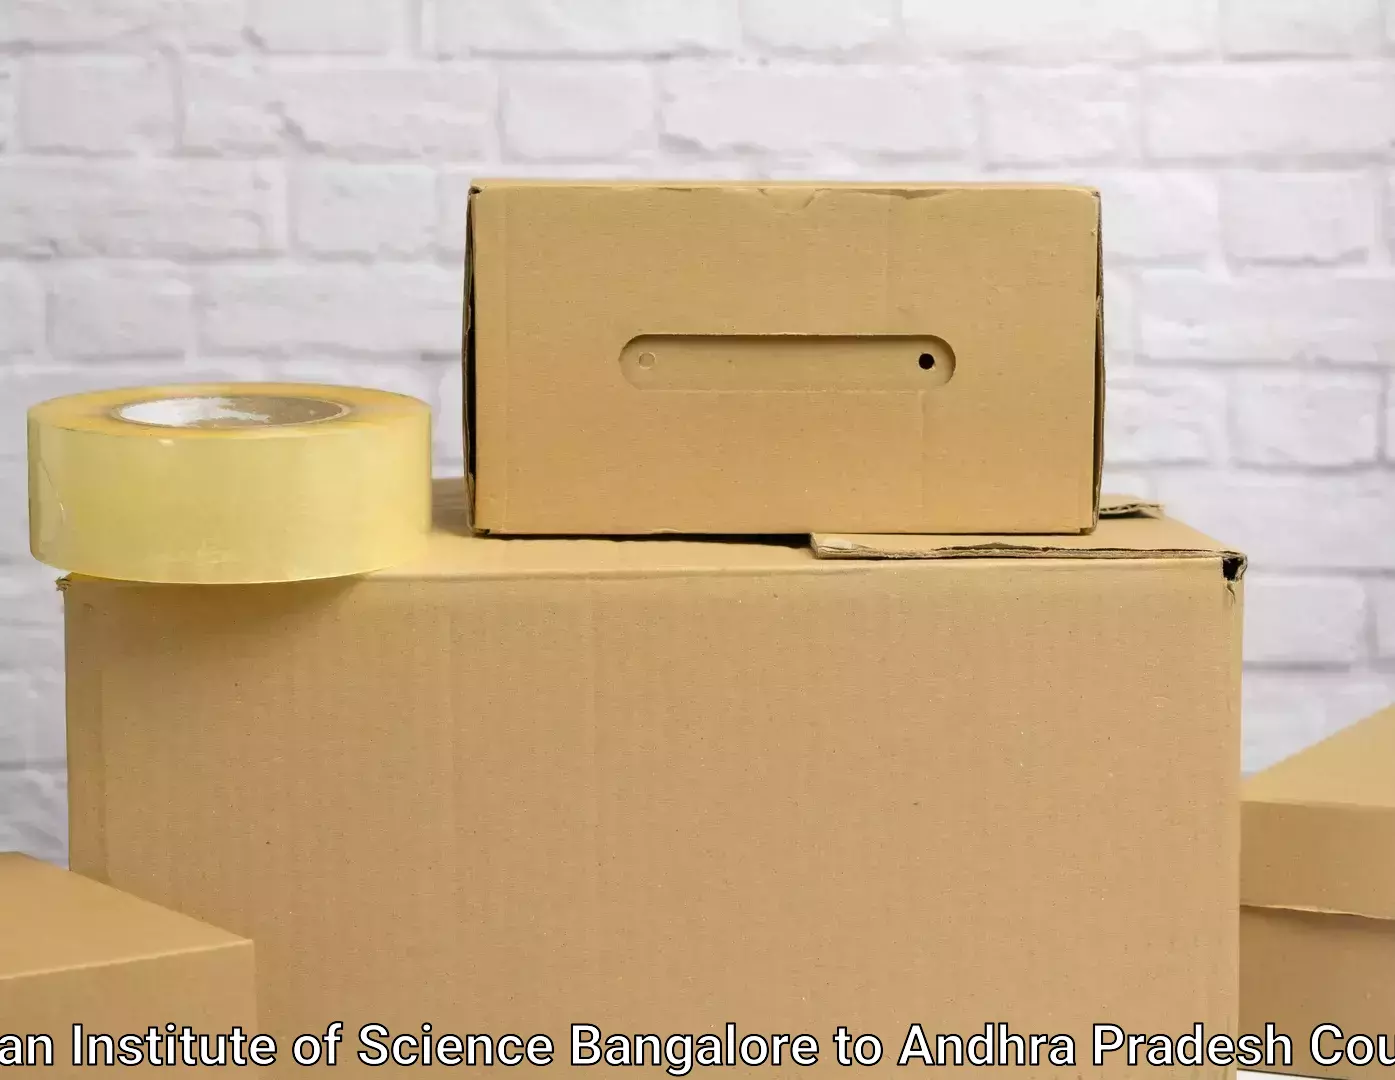 Home relocation services in Indian Institute of Science Bangalore to Andhra Pradesh